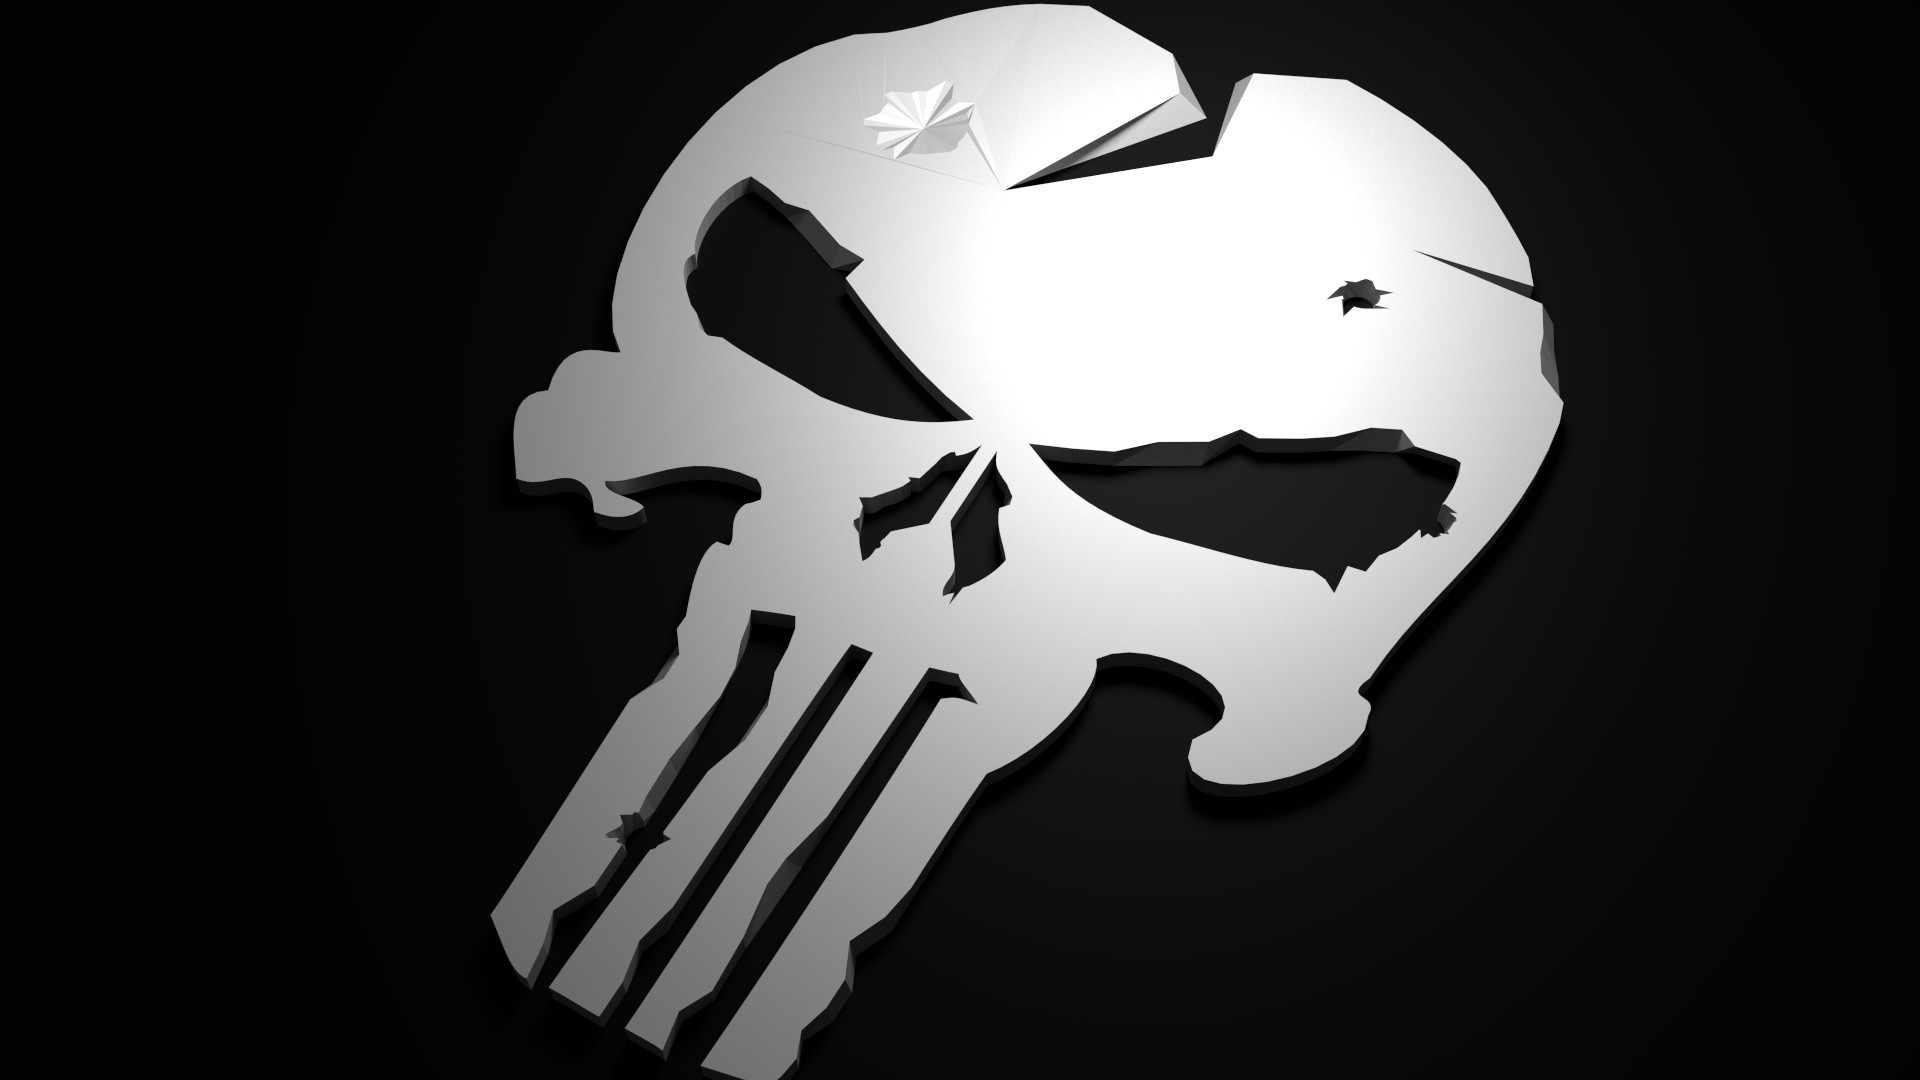 1920x1080 Low Poly Punisher (1920 x 1080) HD Wallpaper From Gallsource.com